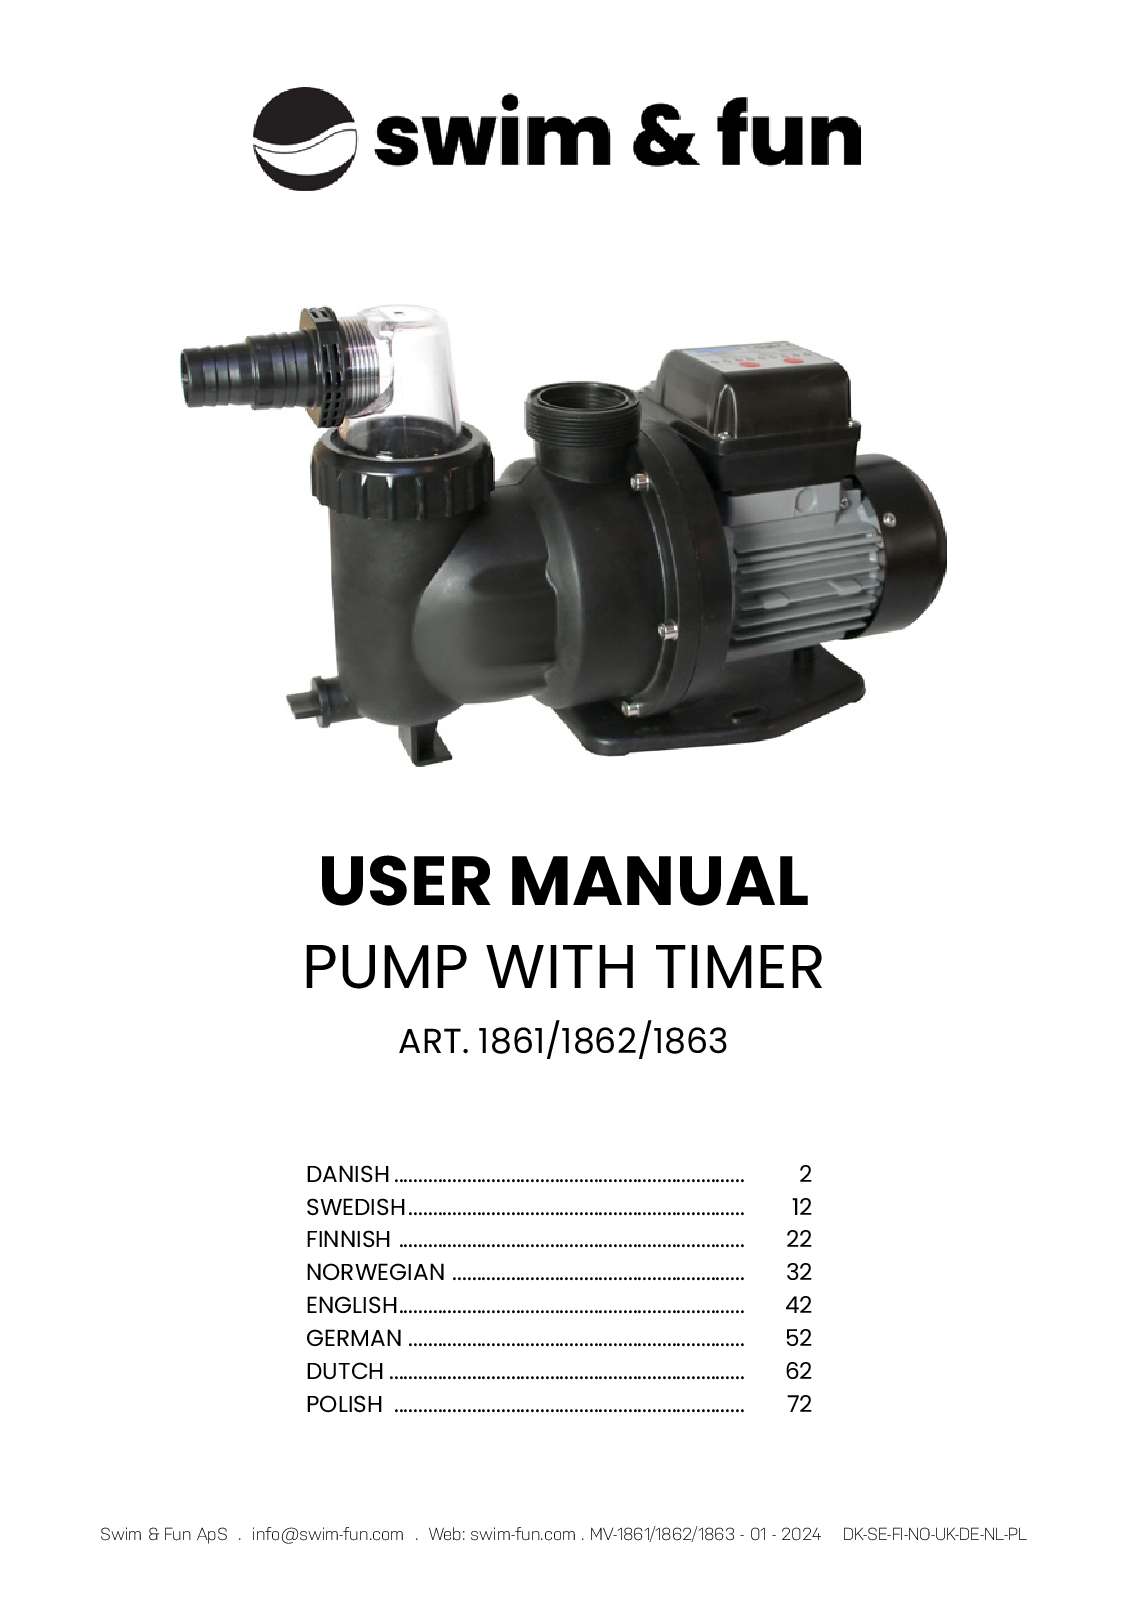 Pump with timer 1861/1862/1863